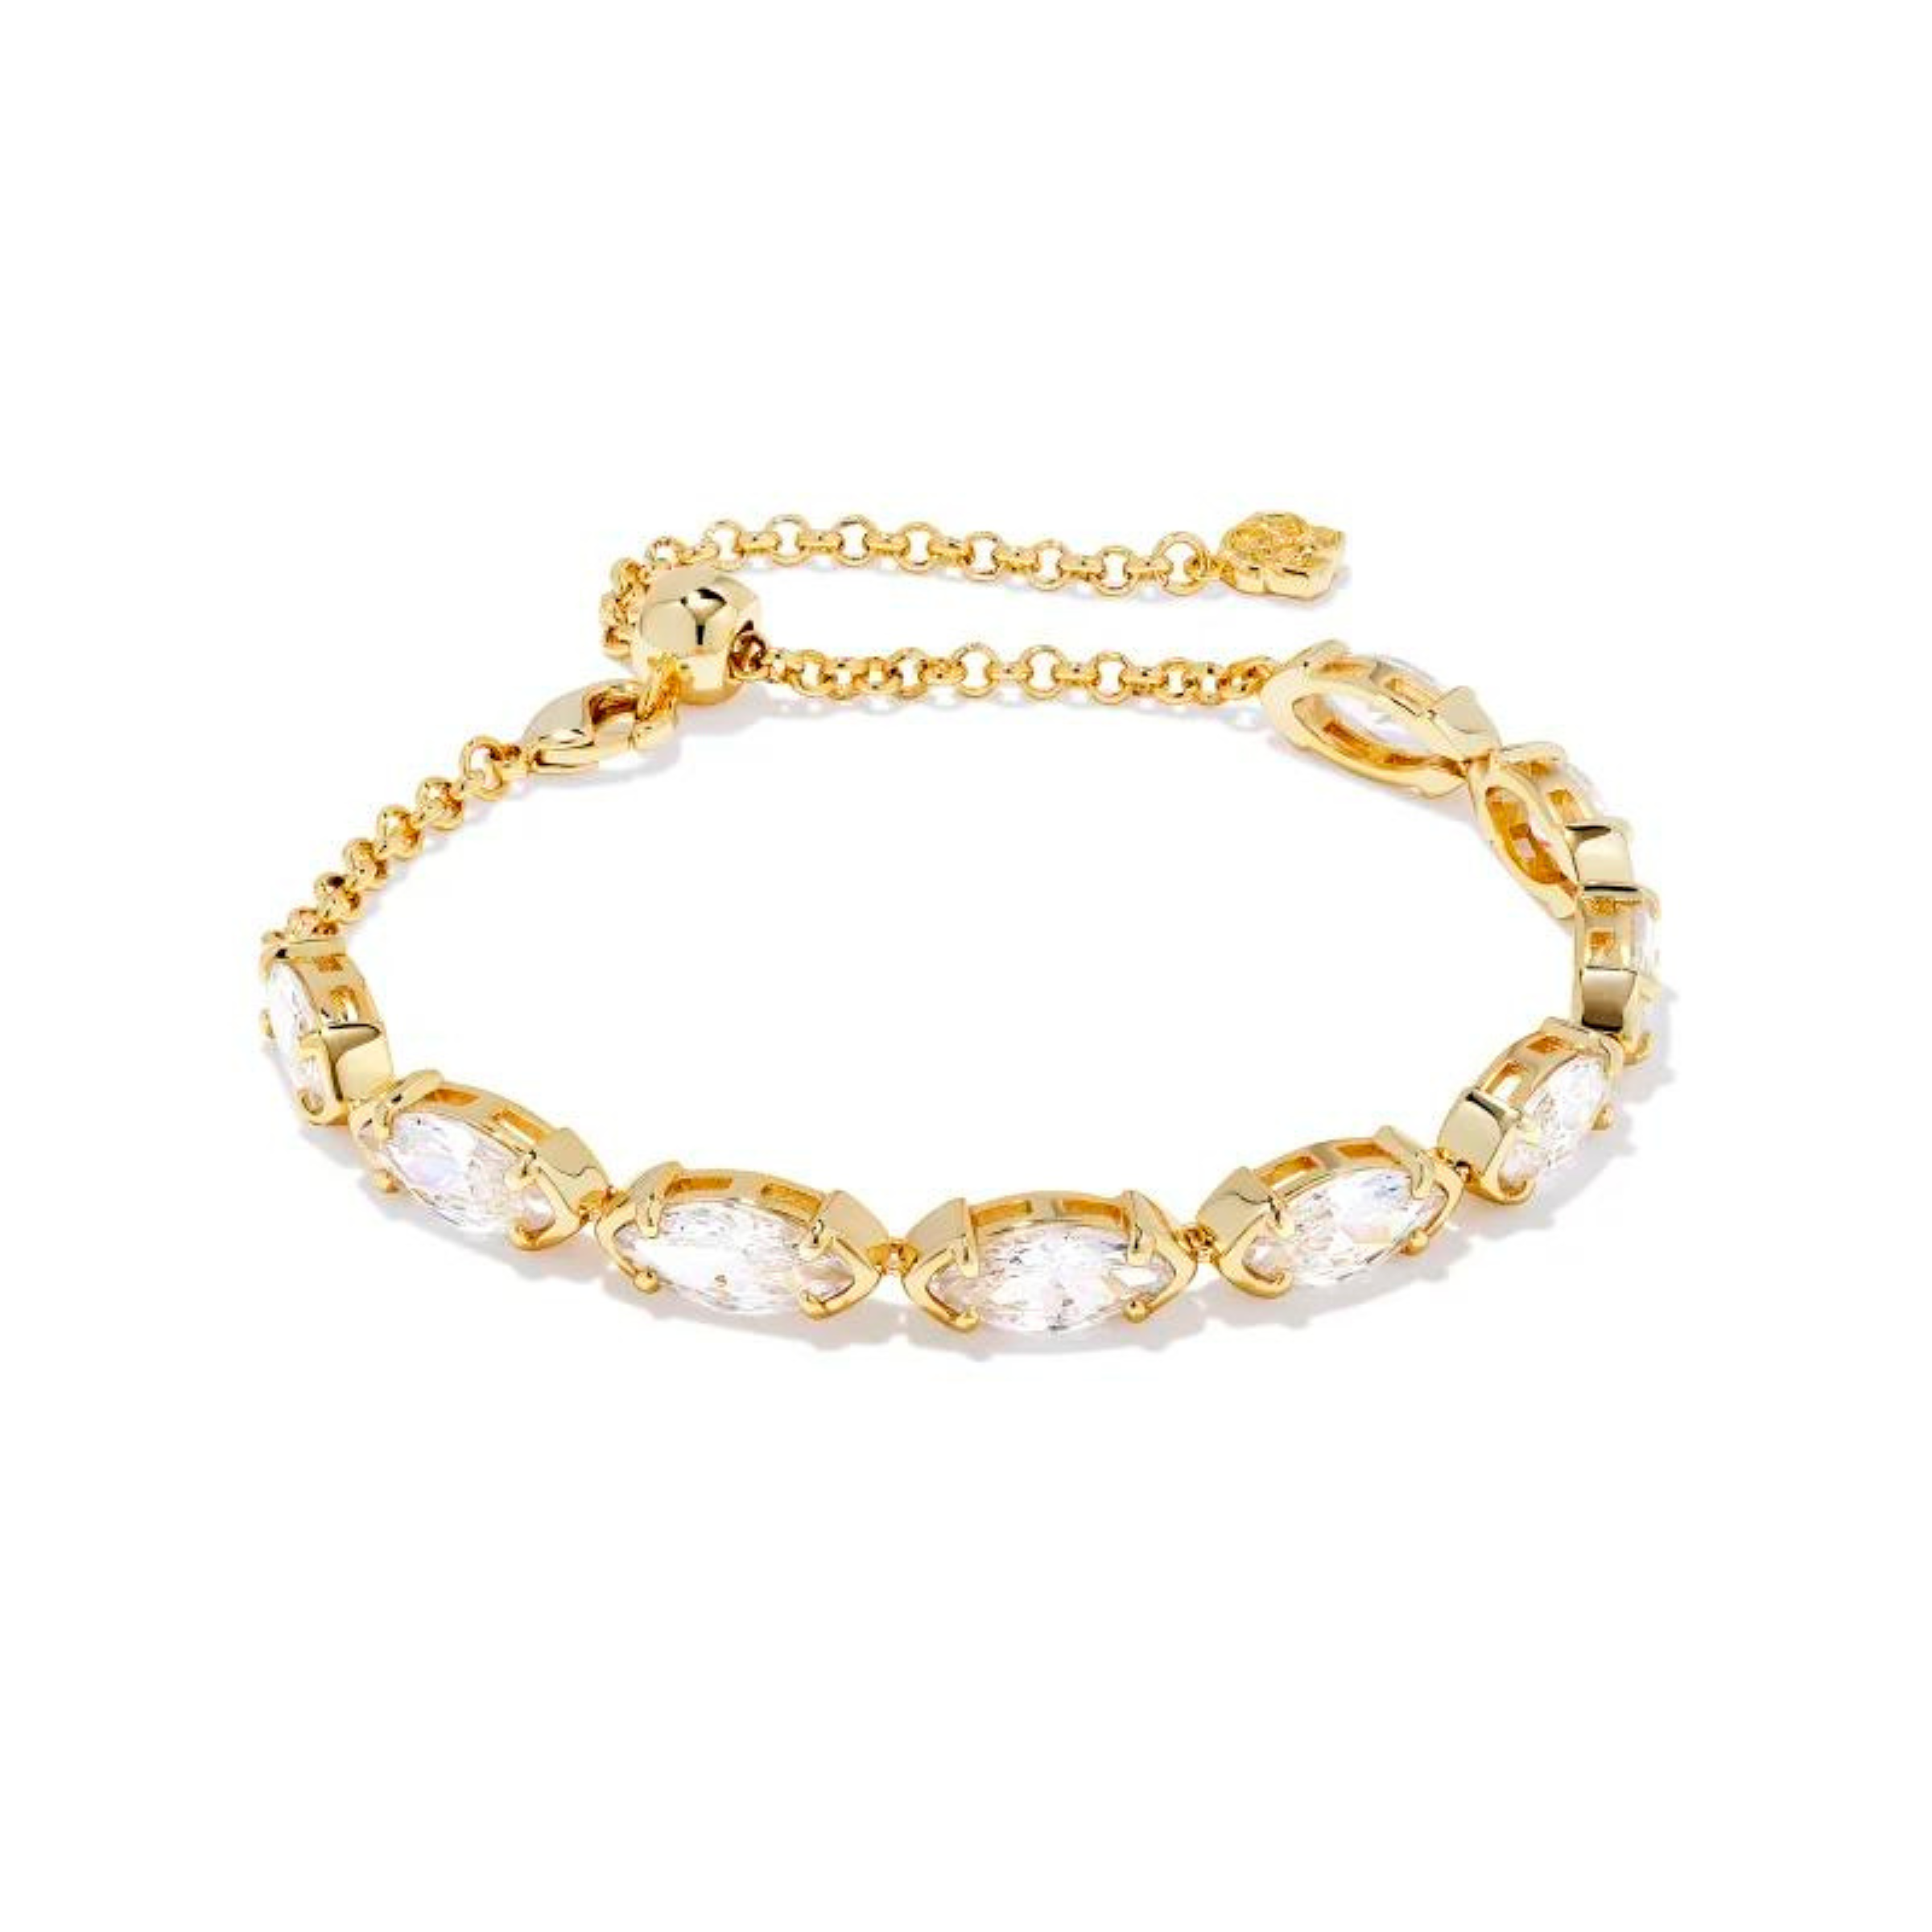 Kendra Scott | Genevieve Gold Delicate Chain Bracelet in White Crystal - Giddy Up Glamour Boutique